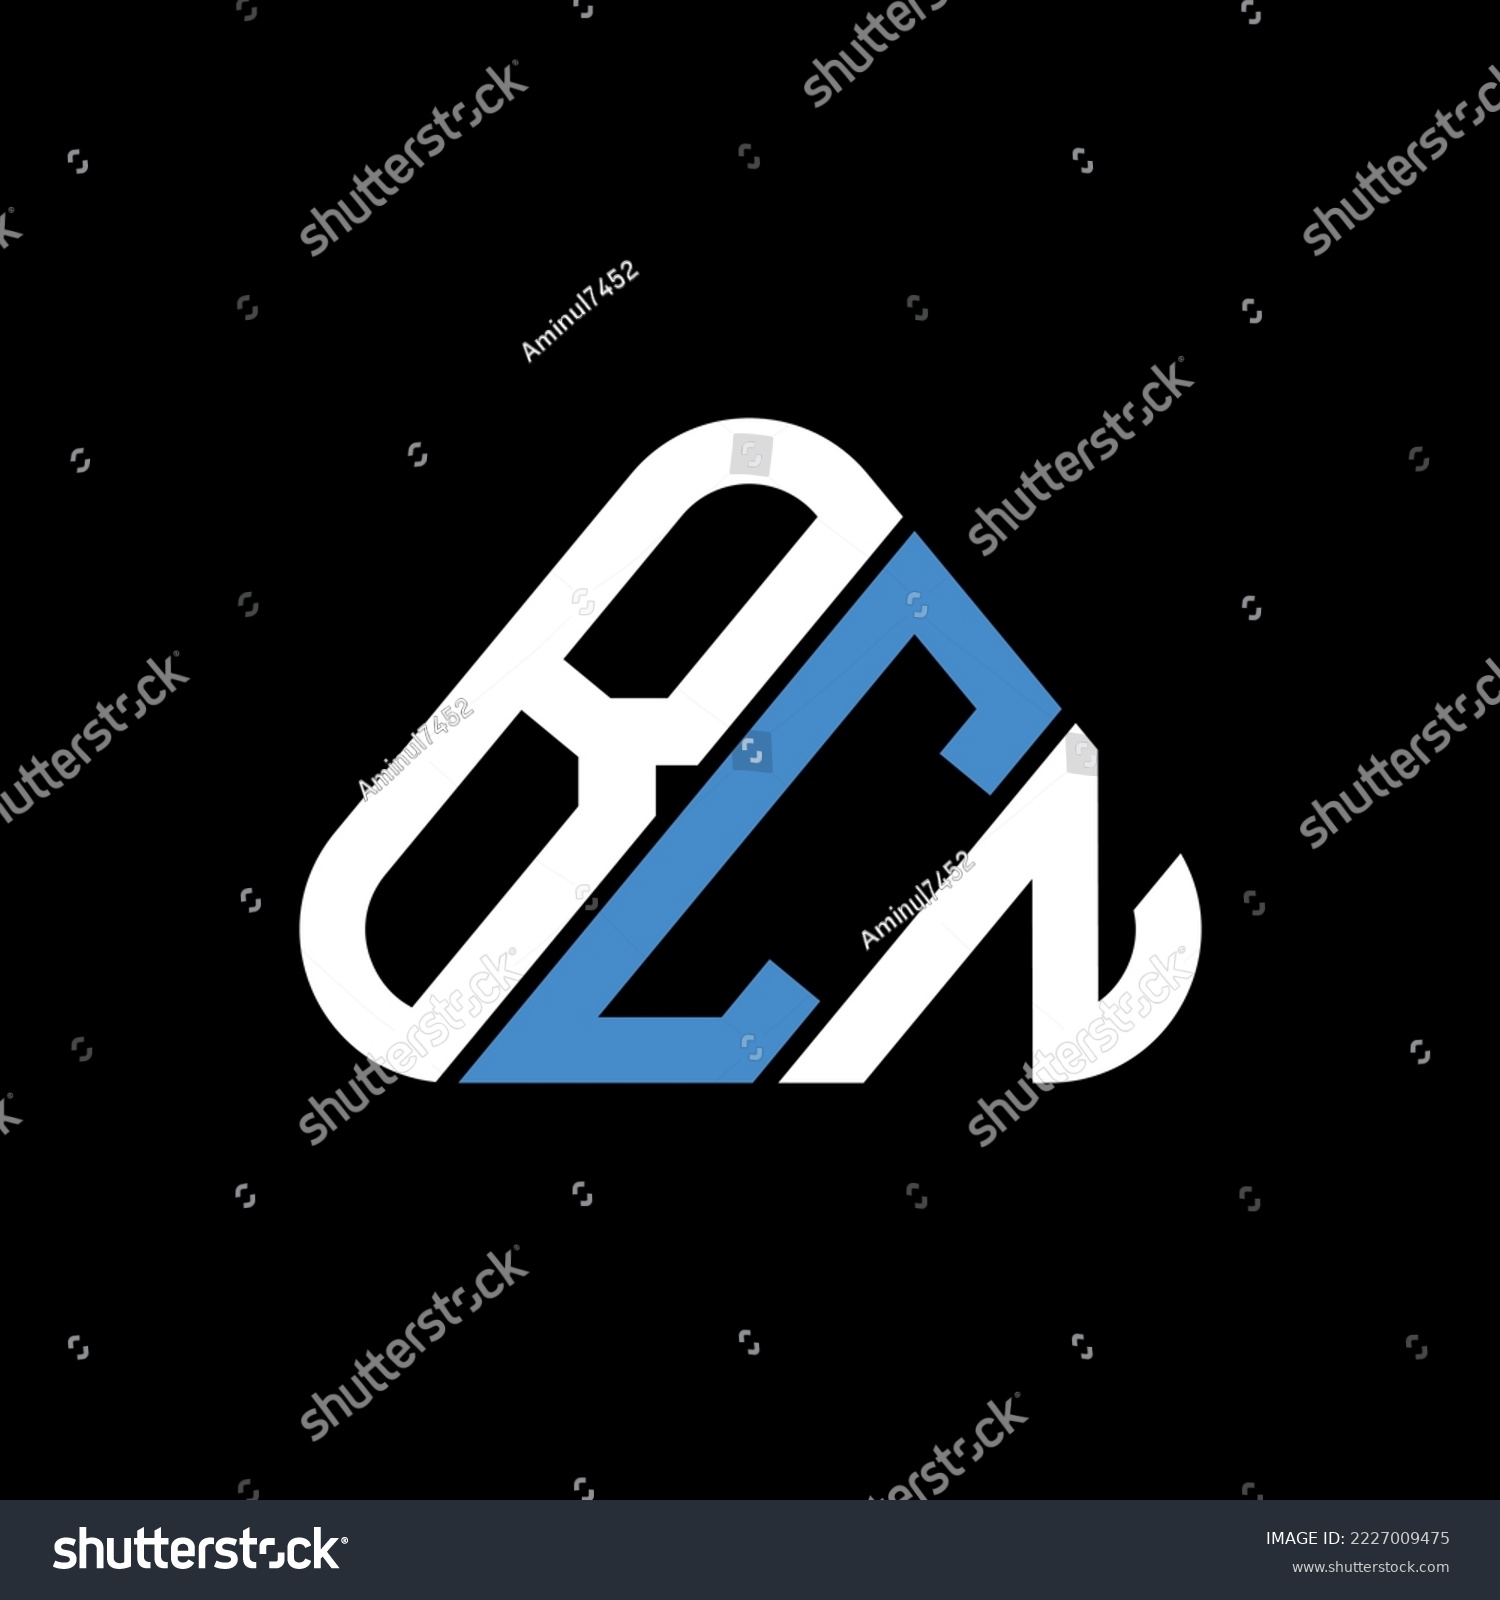 SVG of BCN letter logo creative design with vector graphic, BCN simple and modern logo in round triangle shape. svg